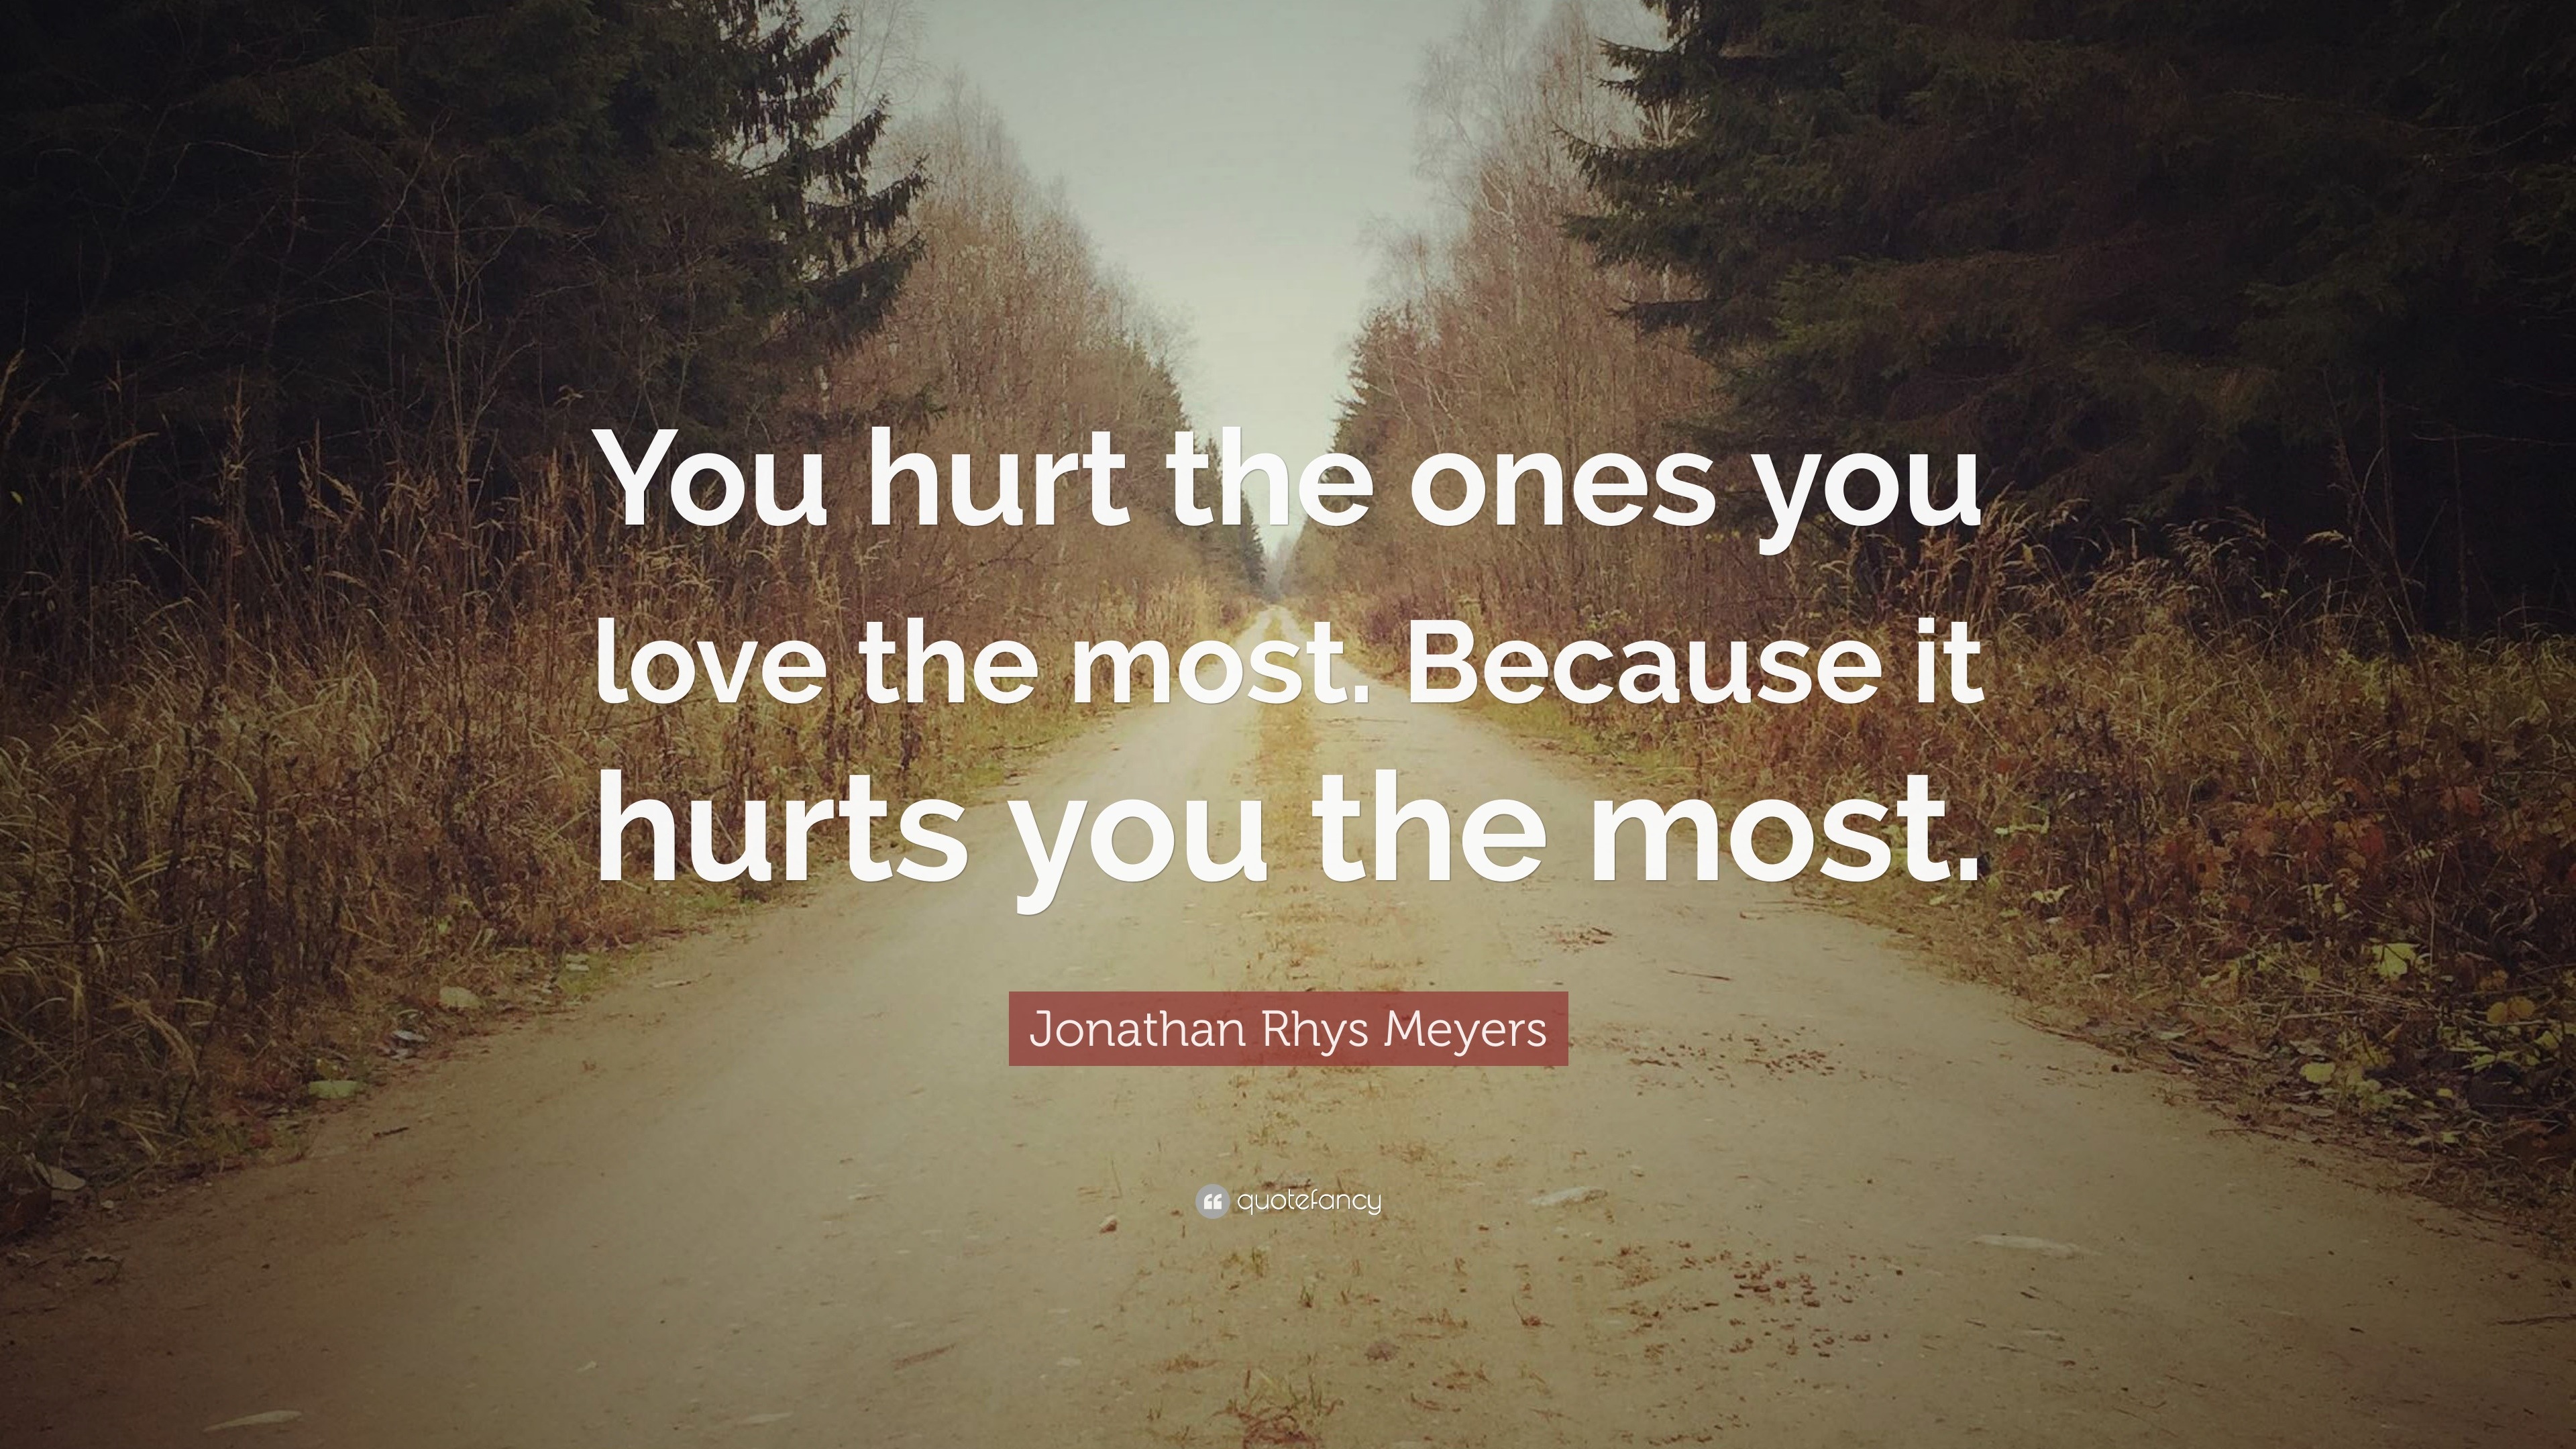 Jonathan Rhys Meyers Quote: “You hurt the ones you love the most